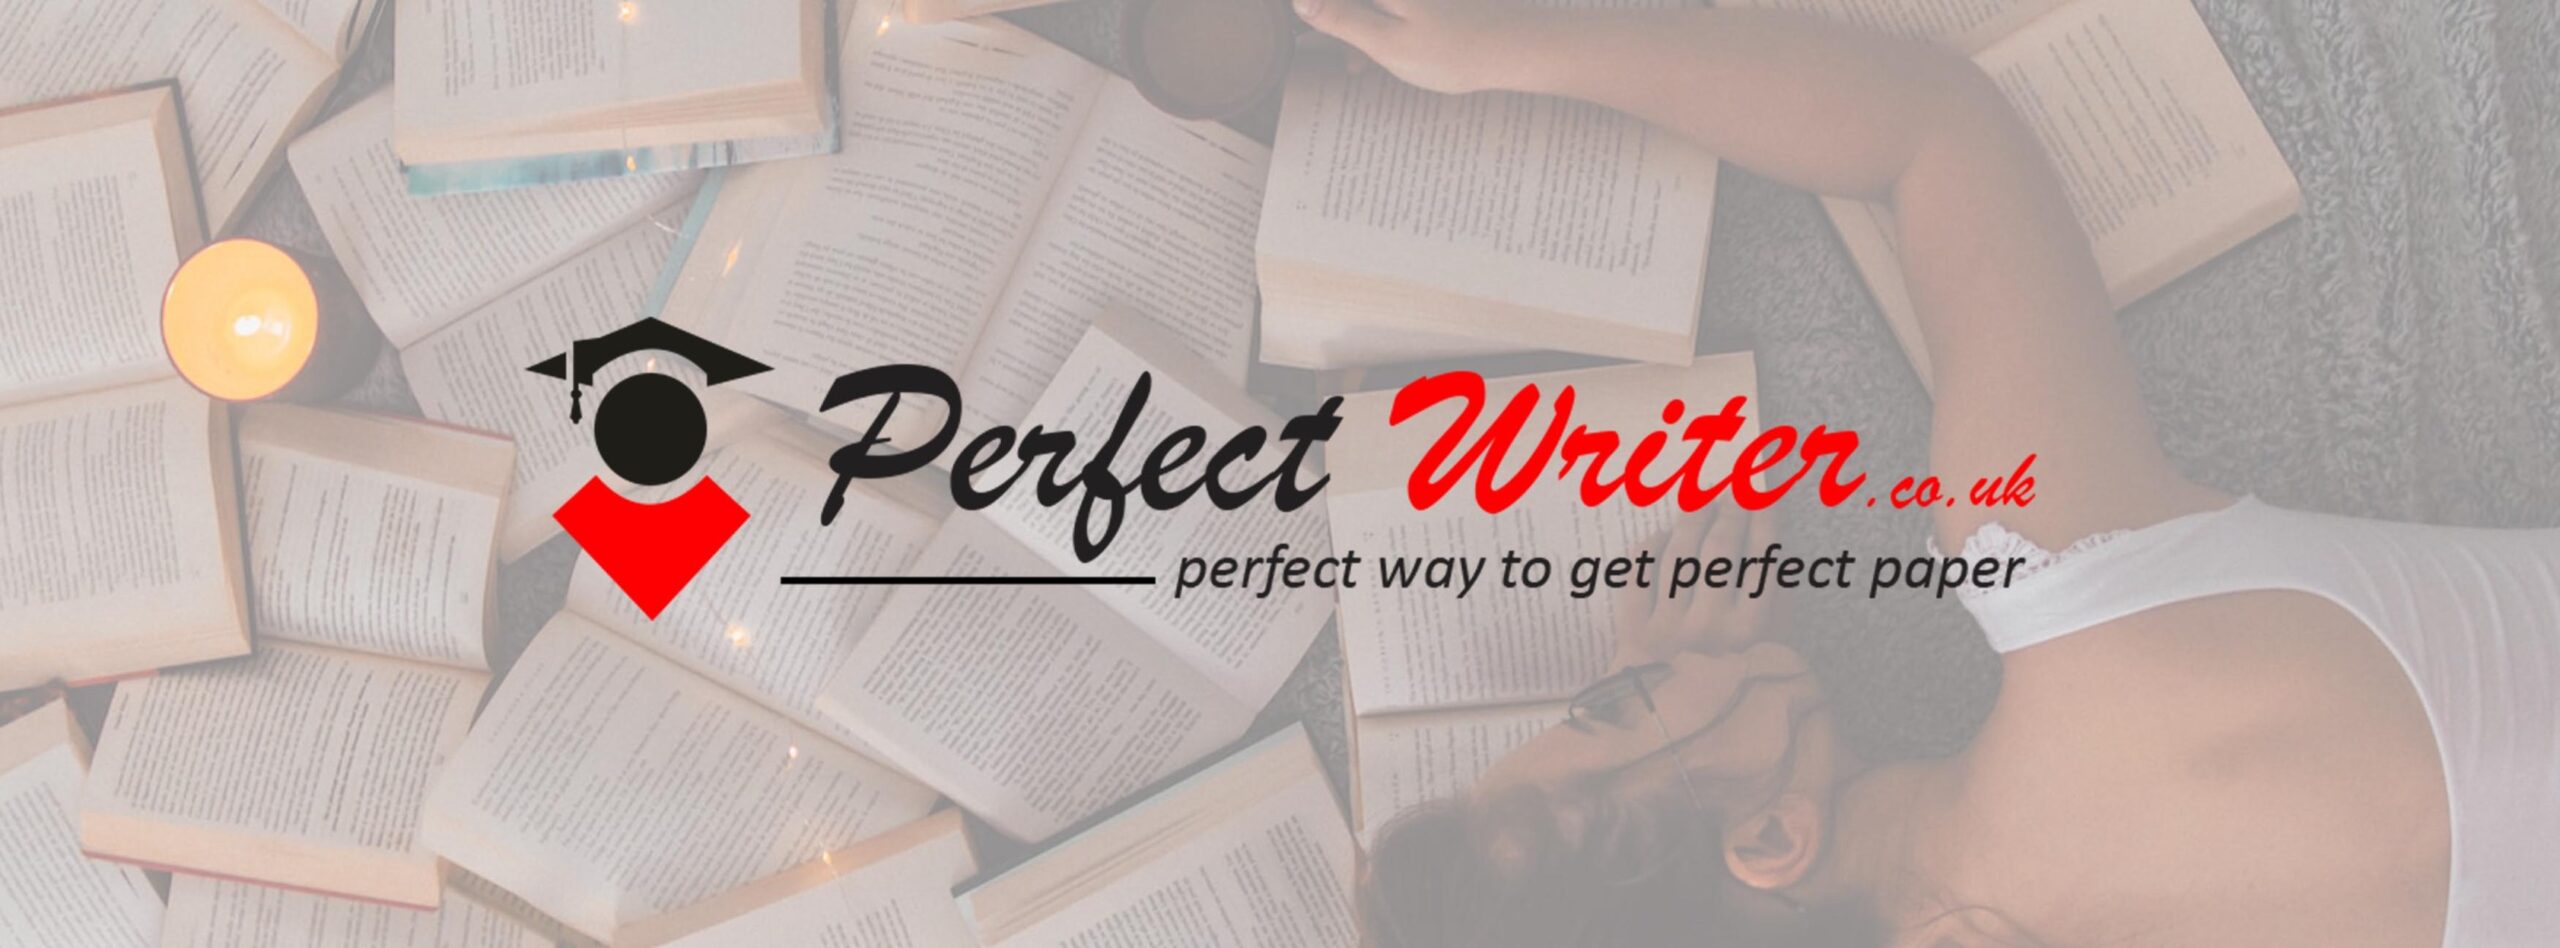 The Top Academic Writing Services Perfect Writer UK Offers!